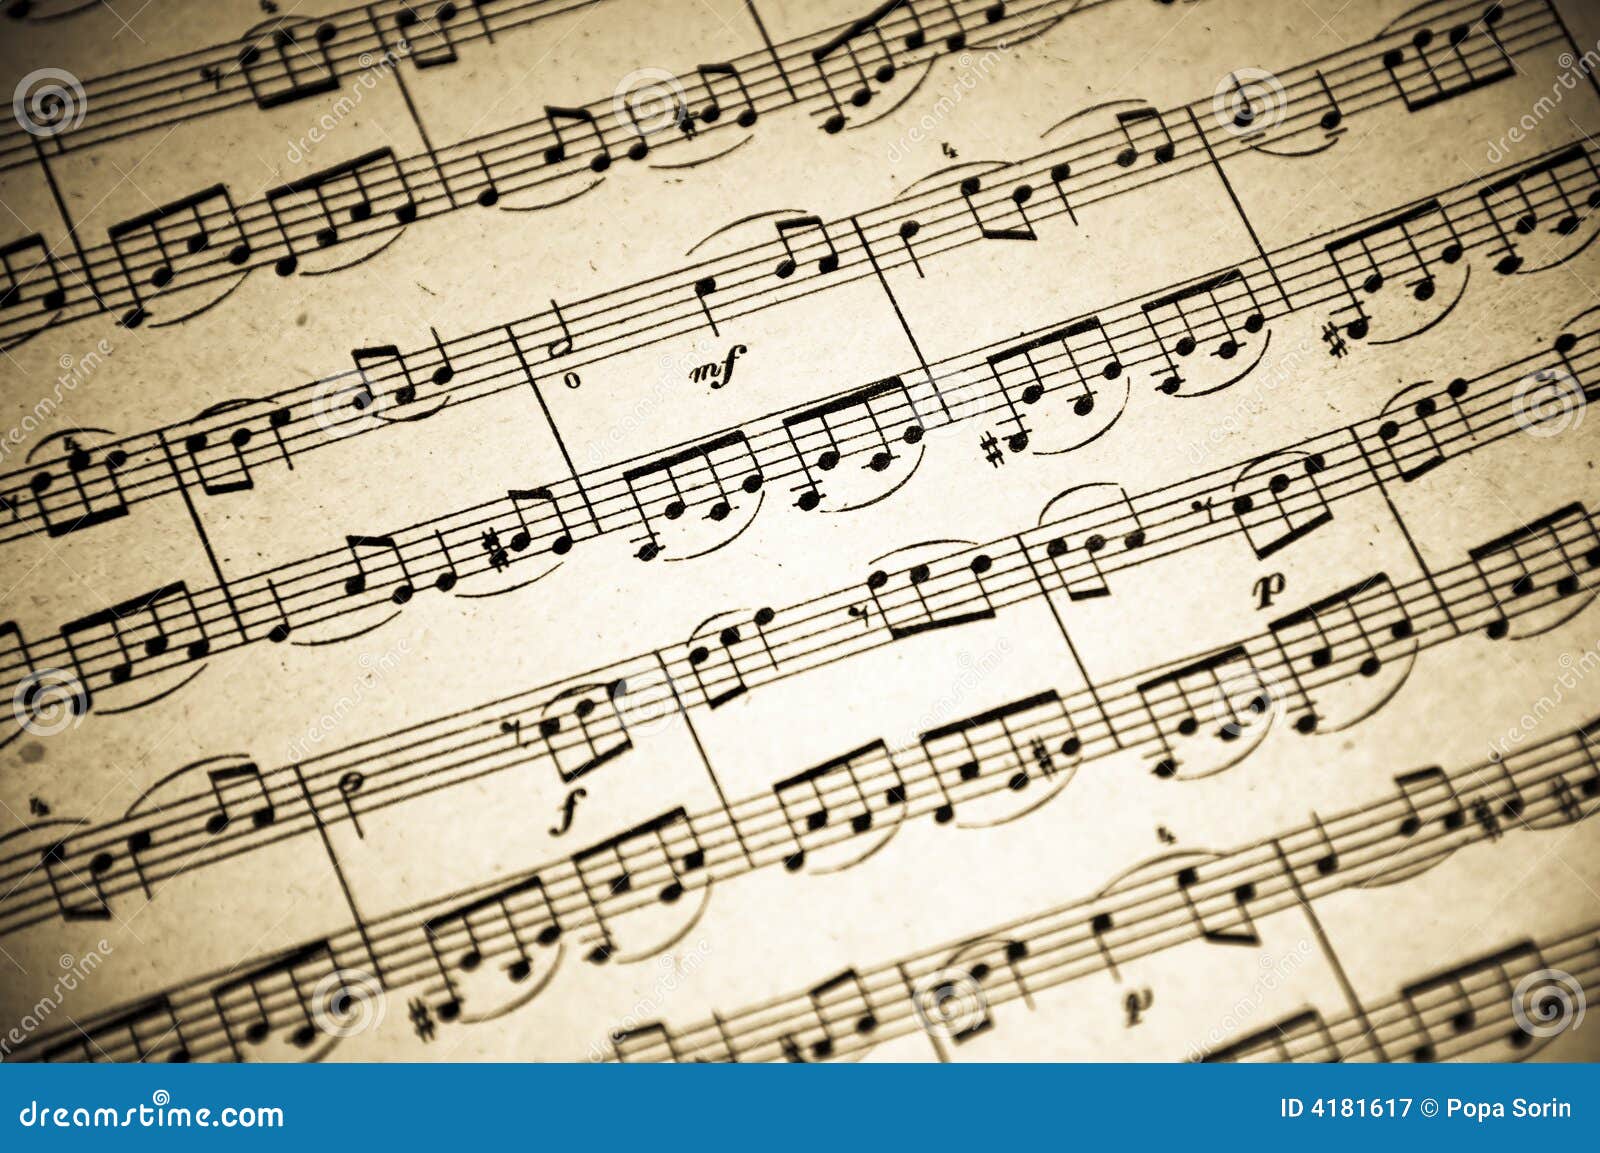 Music Notes Background Royalty Free Stock Photography  Image: 4181617